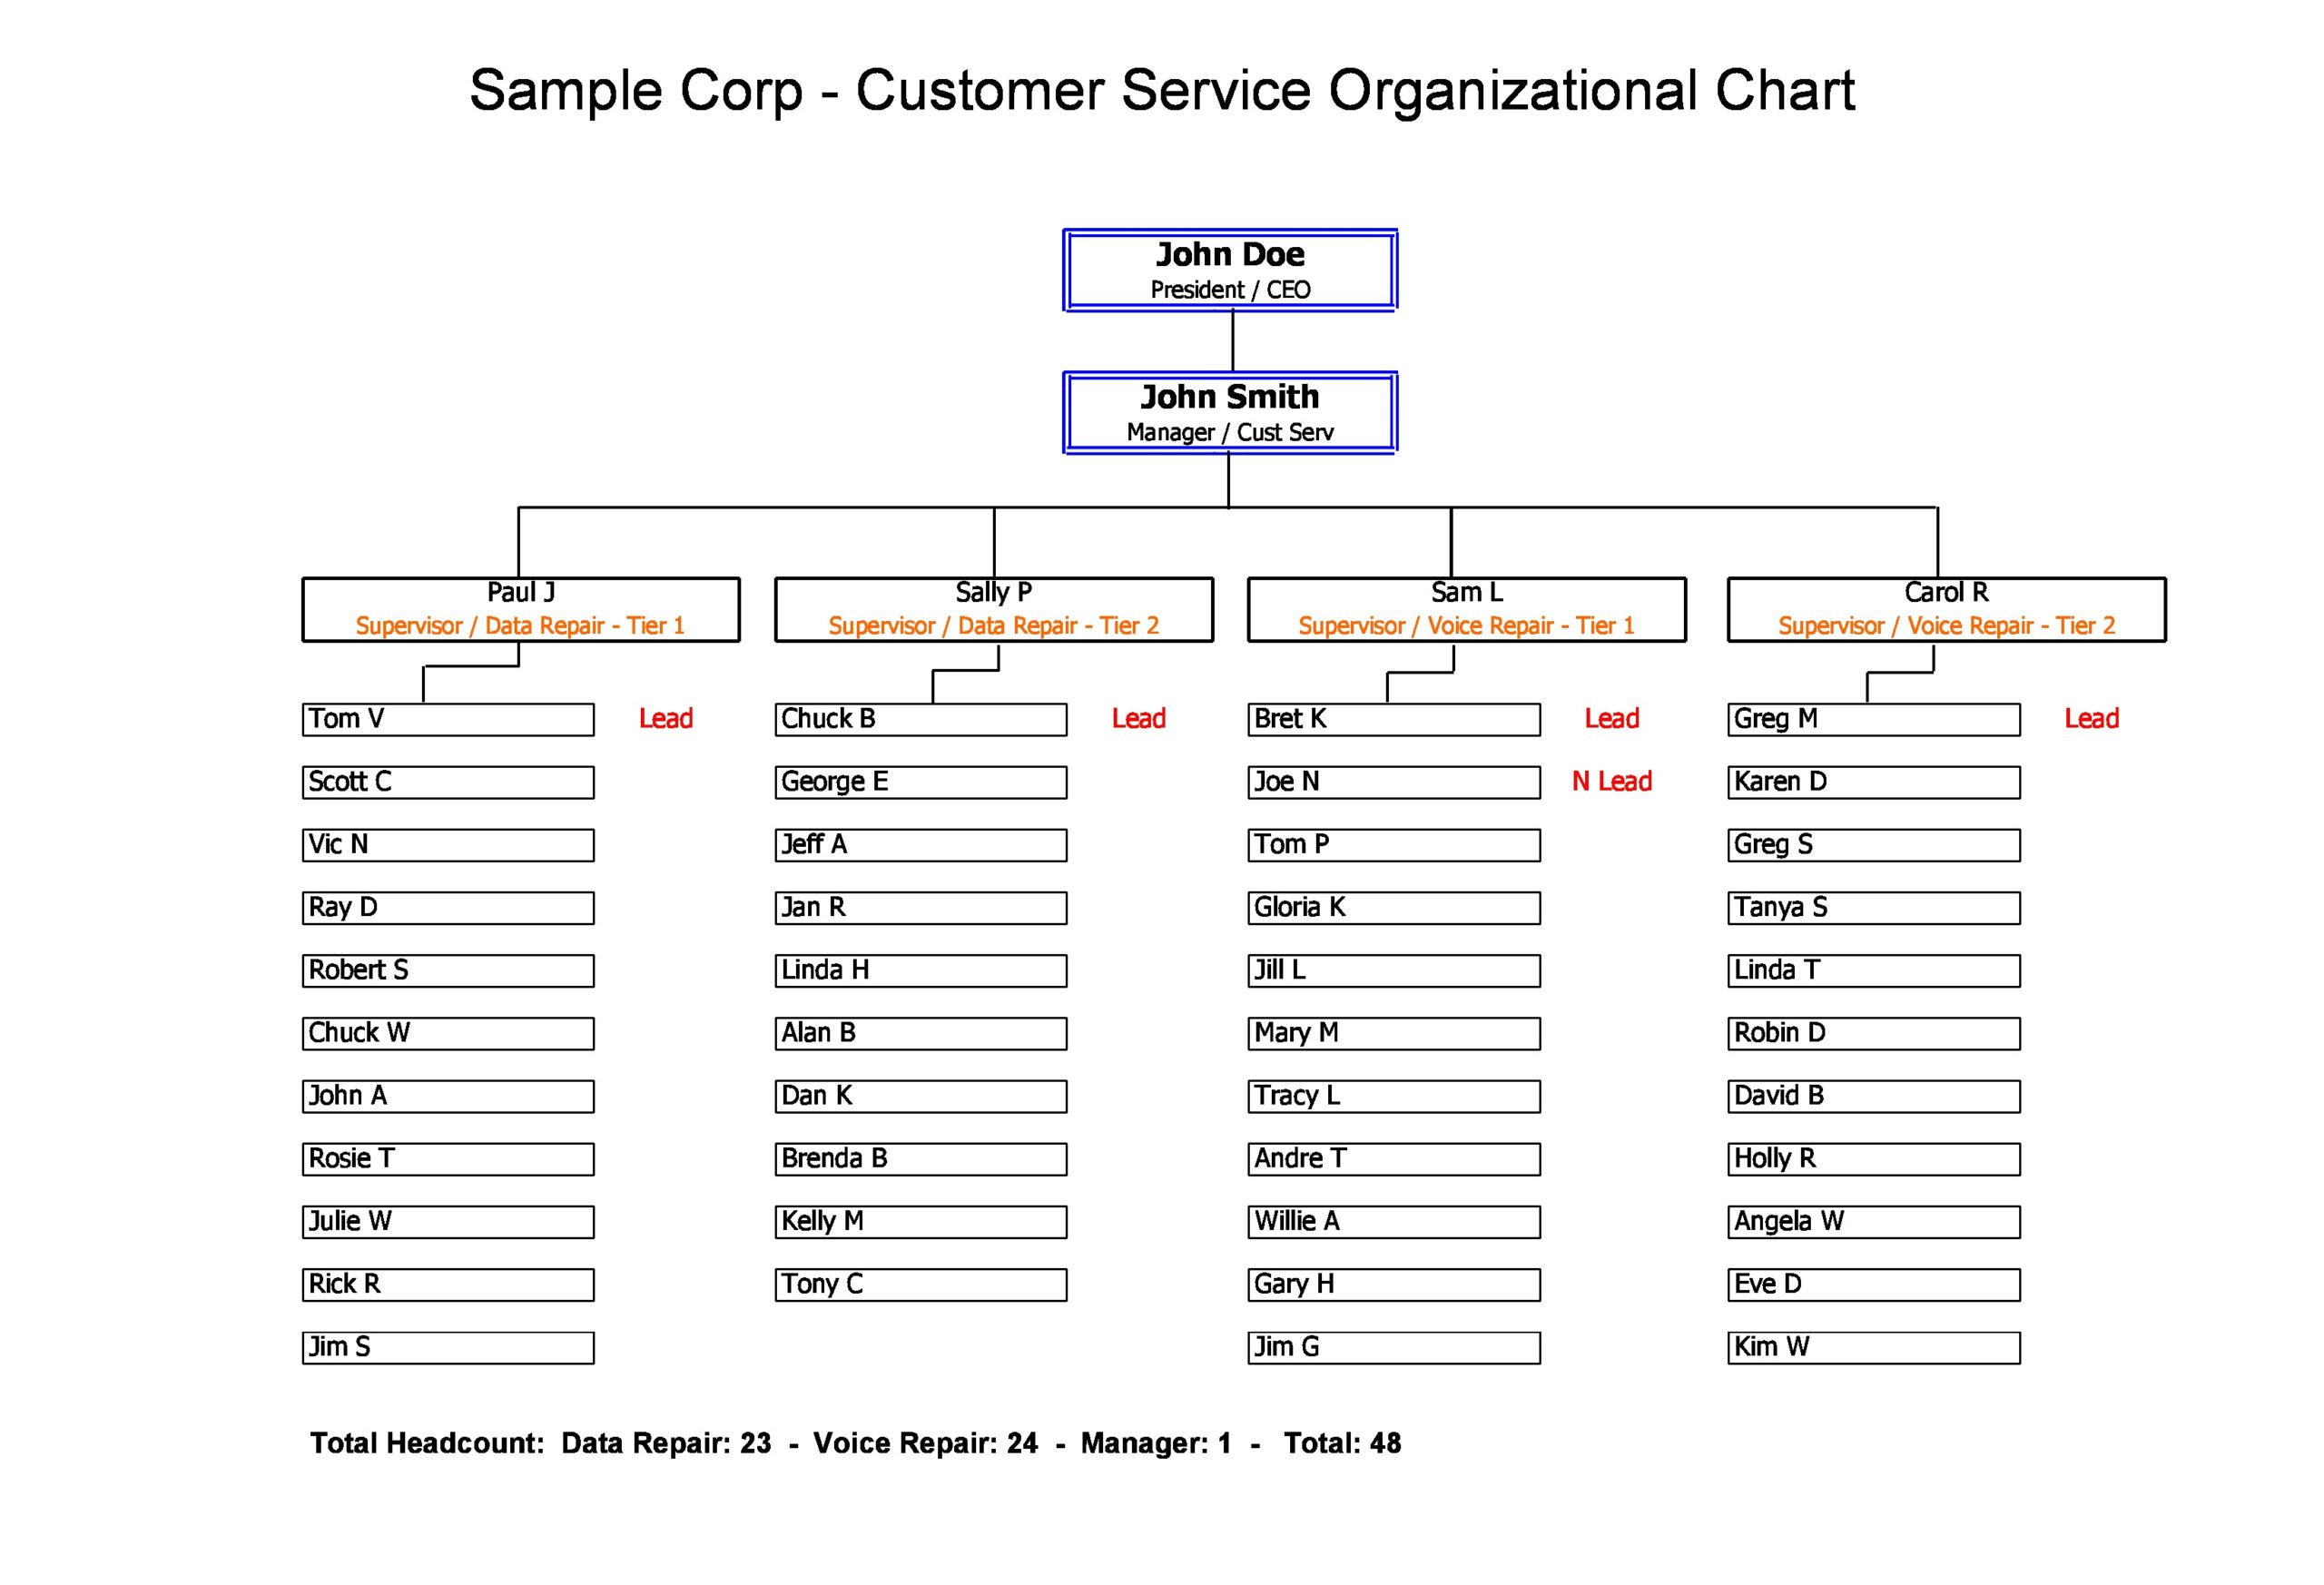 20 Free Organizational Chart Templates (Word) - TemplateArchive With Regard To Word Org Chart Template